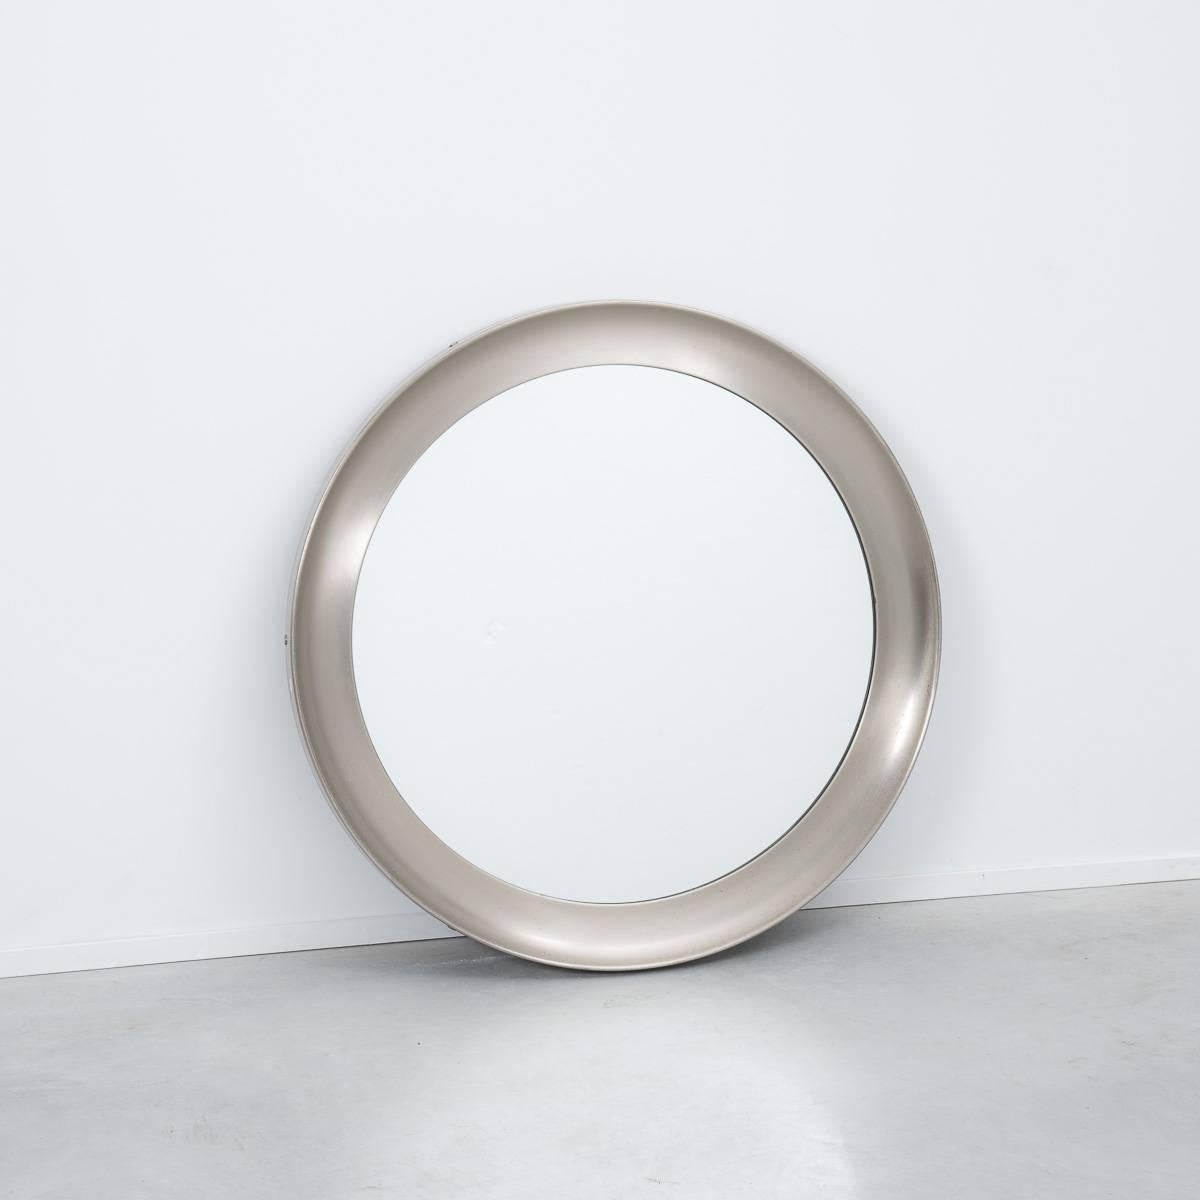 Named after the Greek god ‘Narcissus’, who became infatuated with his reflection, this simplistic beauty of this piece resonates in its simplicity.
Sergio Mazza was born in Milan in 1931. He studied architecture and eventually opened his practice